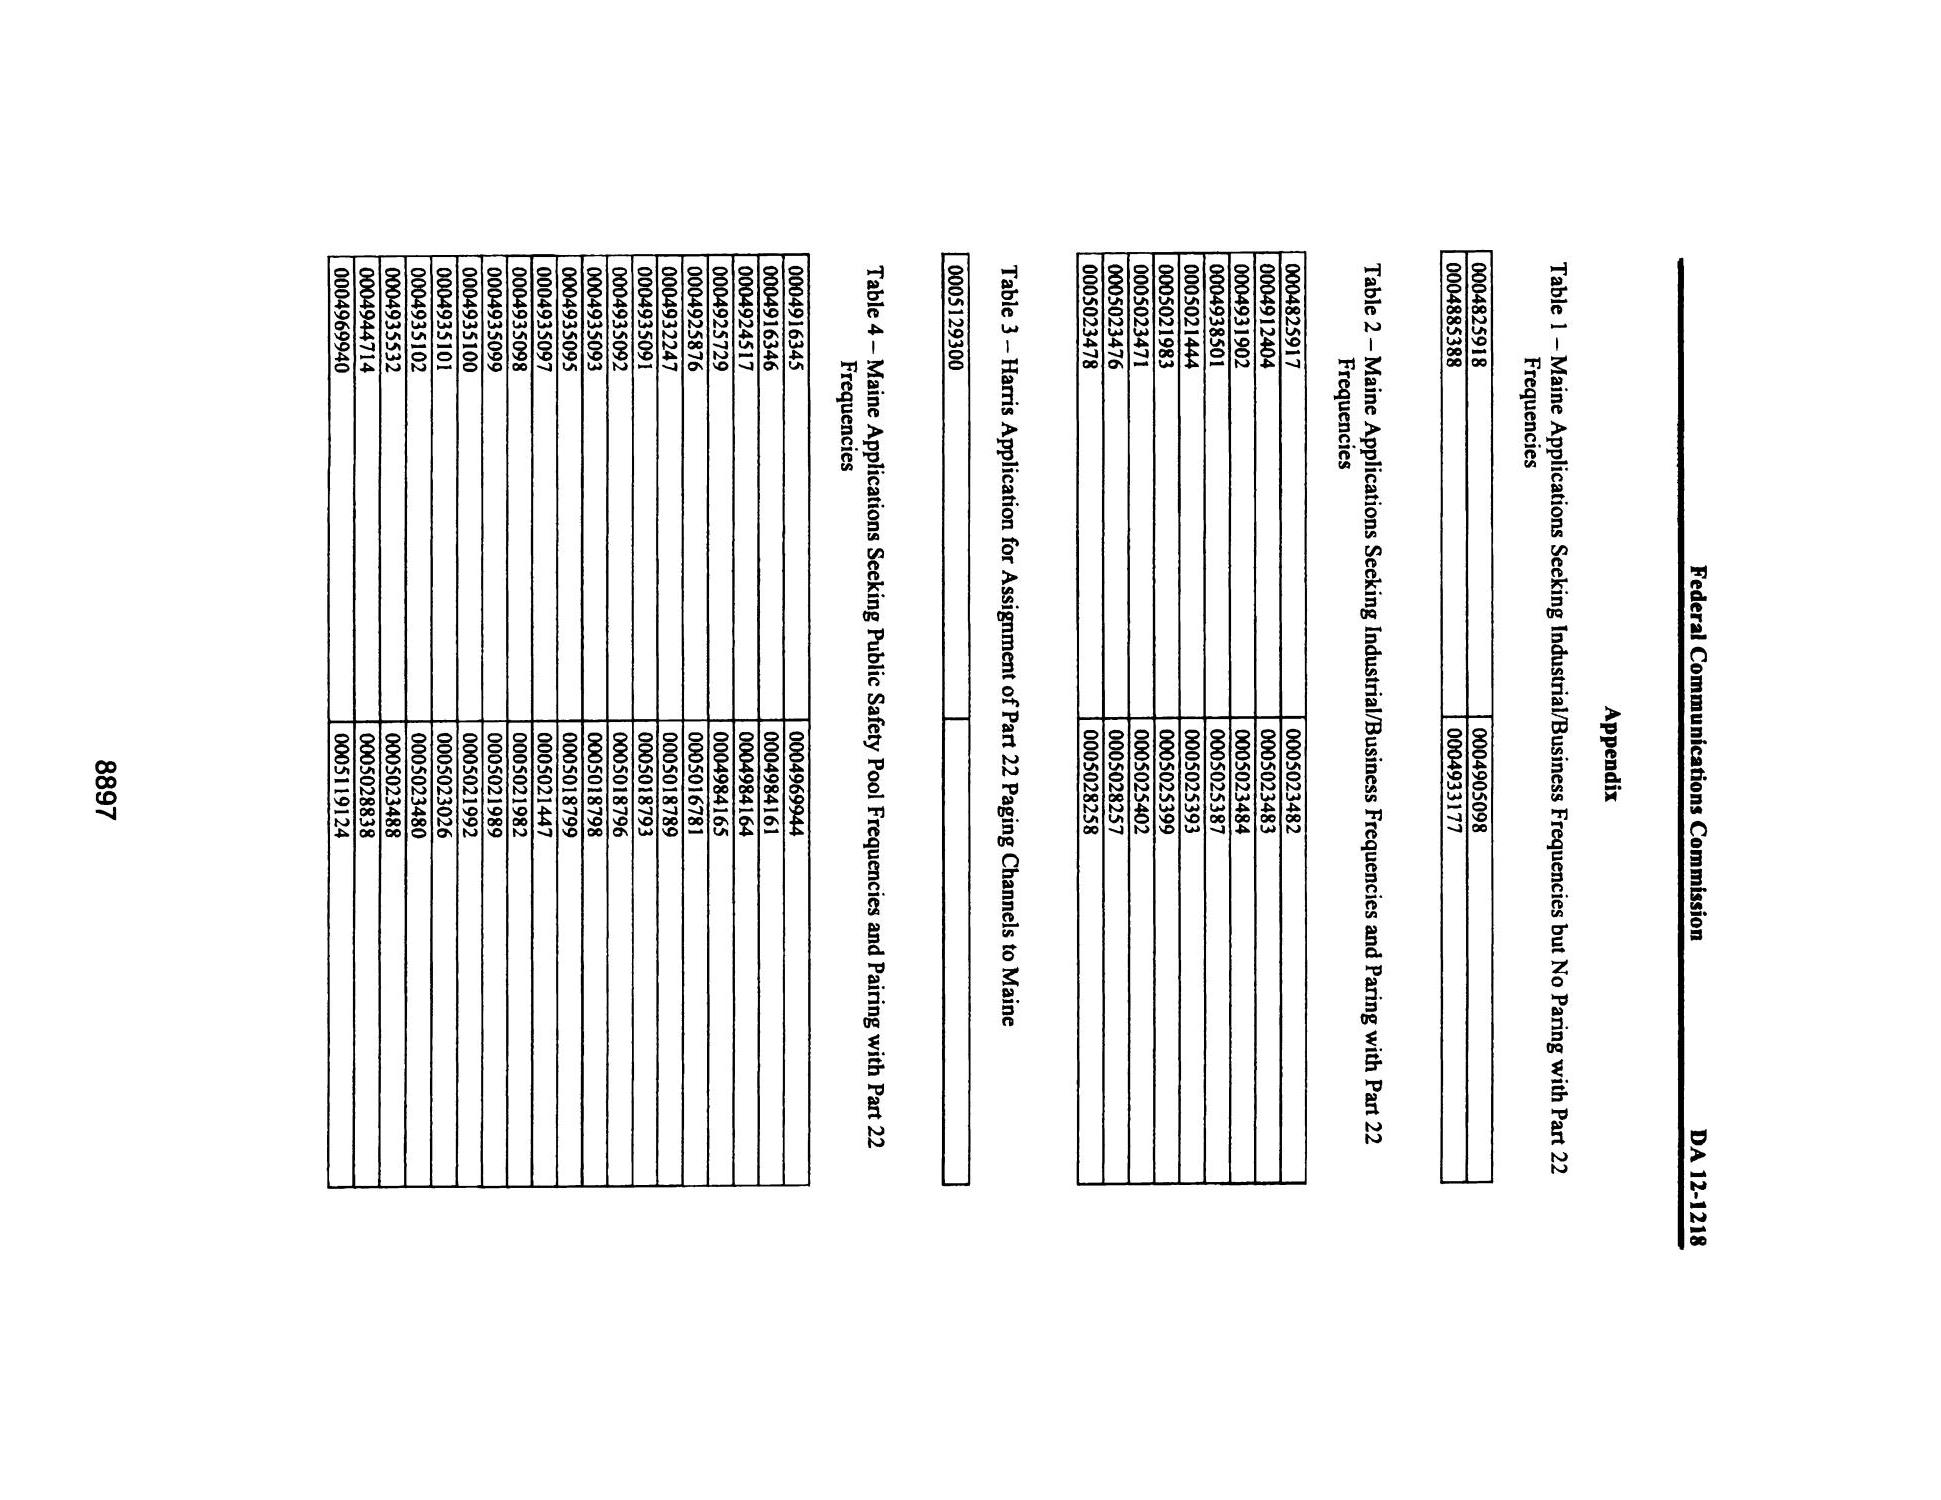 FCC Record, Volume 27, No. 11, Pages 8850 to 9847, July 30 - August 17, 2012
                                                
                                                    8897
                                                